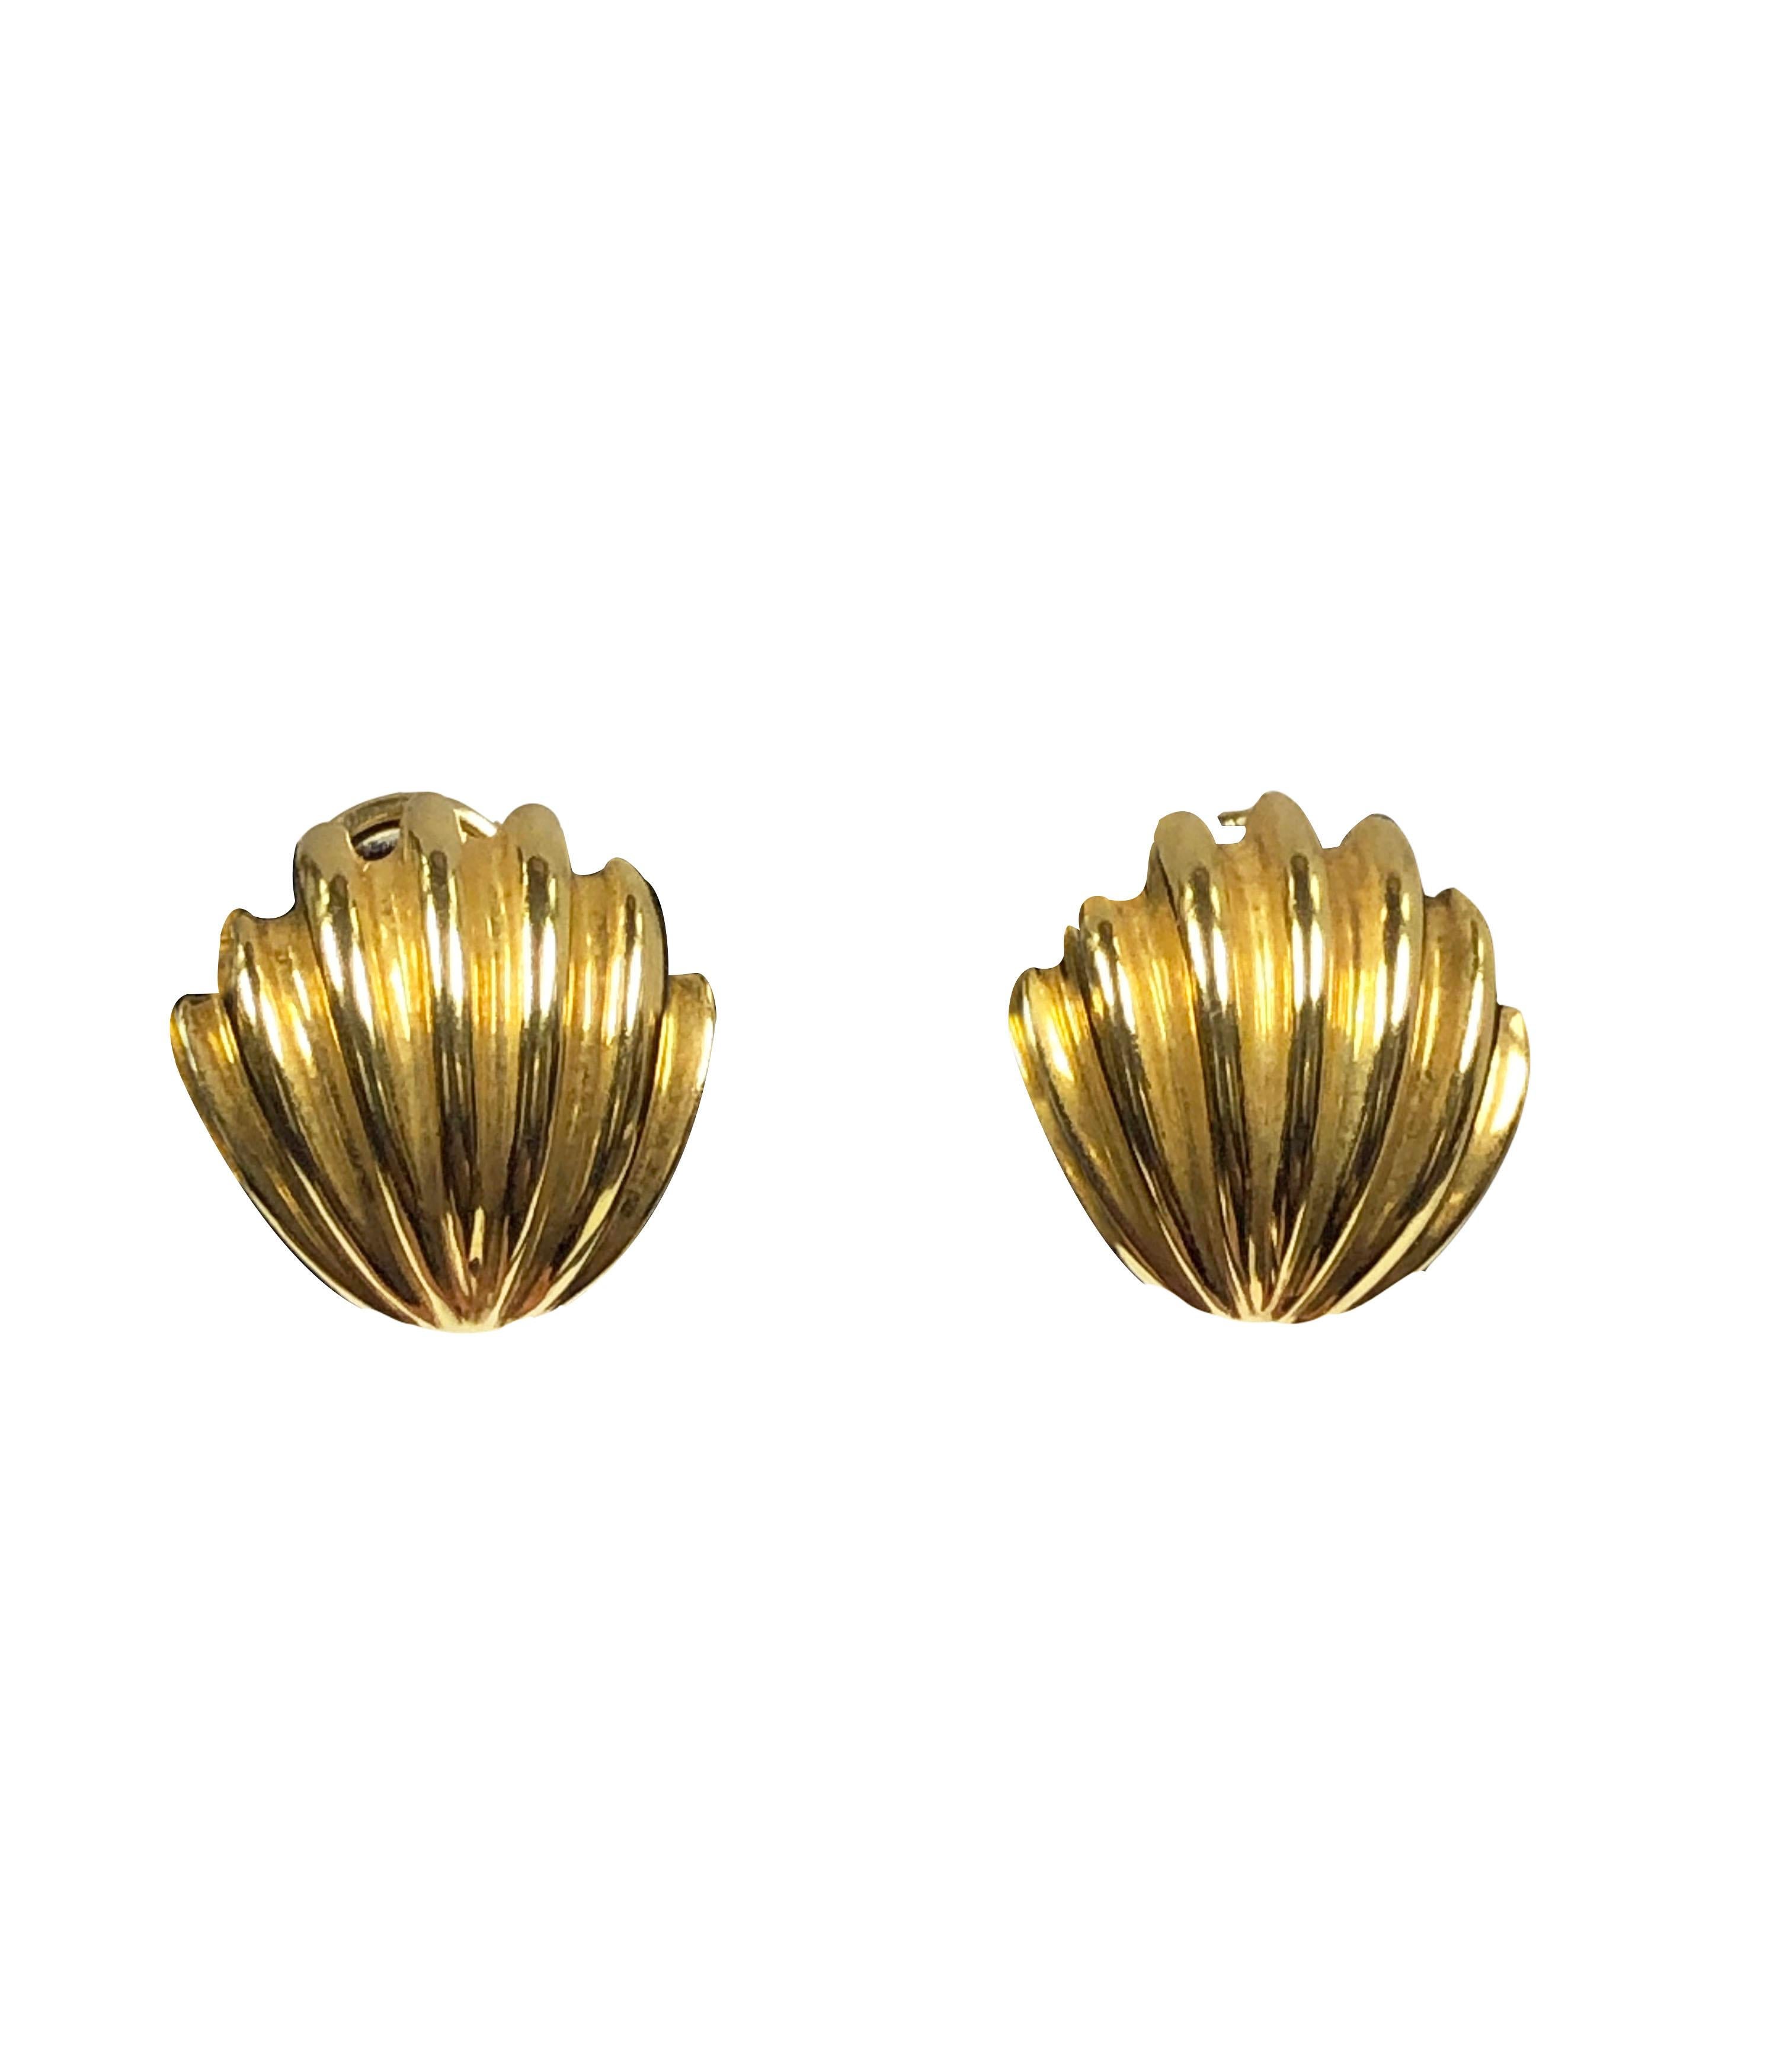 Circa 2000 Tiffany & Company 18k Yellow Gold Shell form Earrings, measuring 5/8 inch in length X 5/8 inch wide and weighing 9.9 Grams. Having Omega clip backs to which a post can be easily added if desired. Comes in a Tiffany Suede travel pouch. 